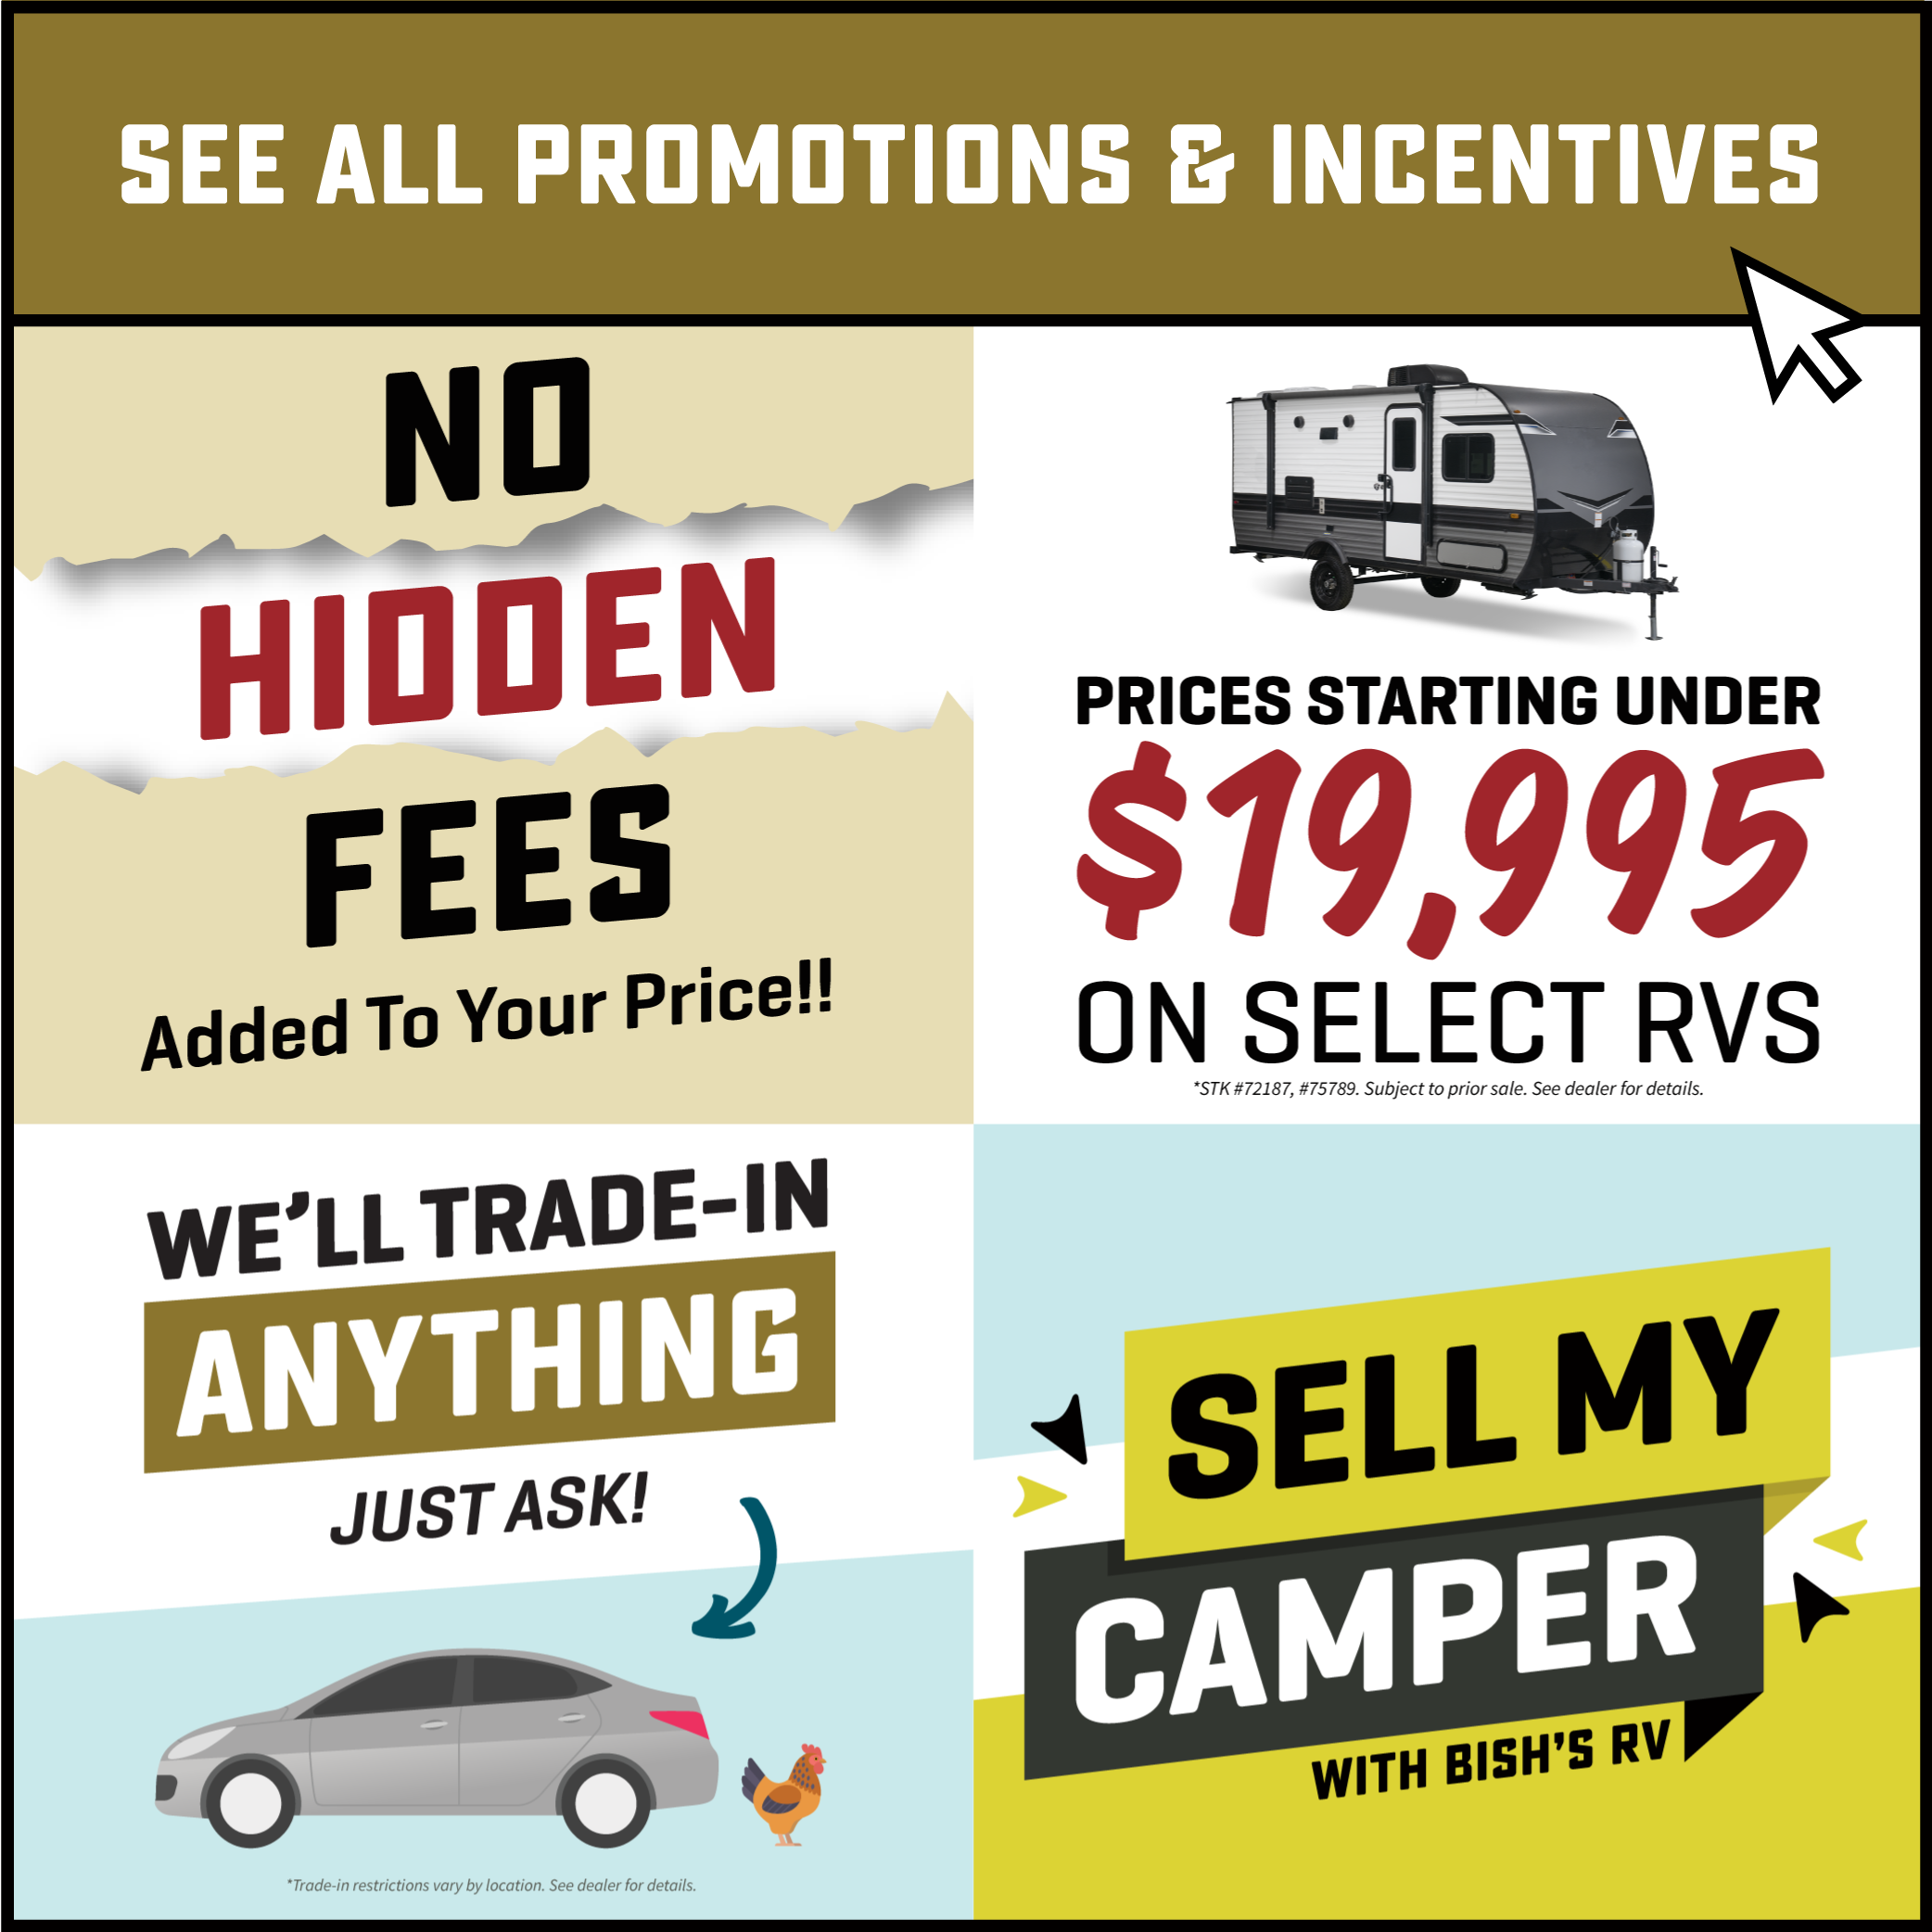 Current sales incentives, deals, and promotions happening at Bish's RV